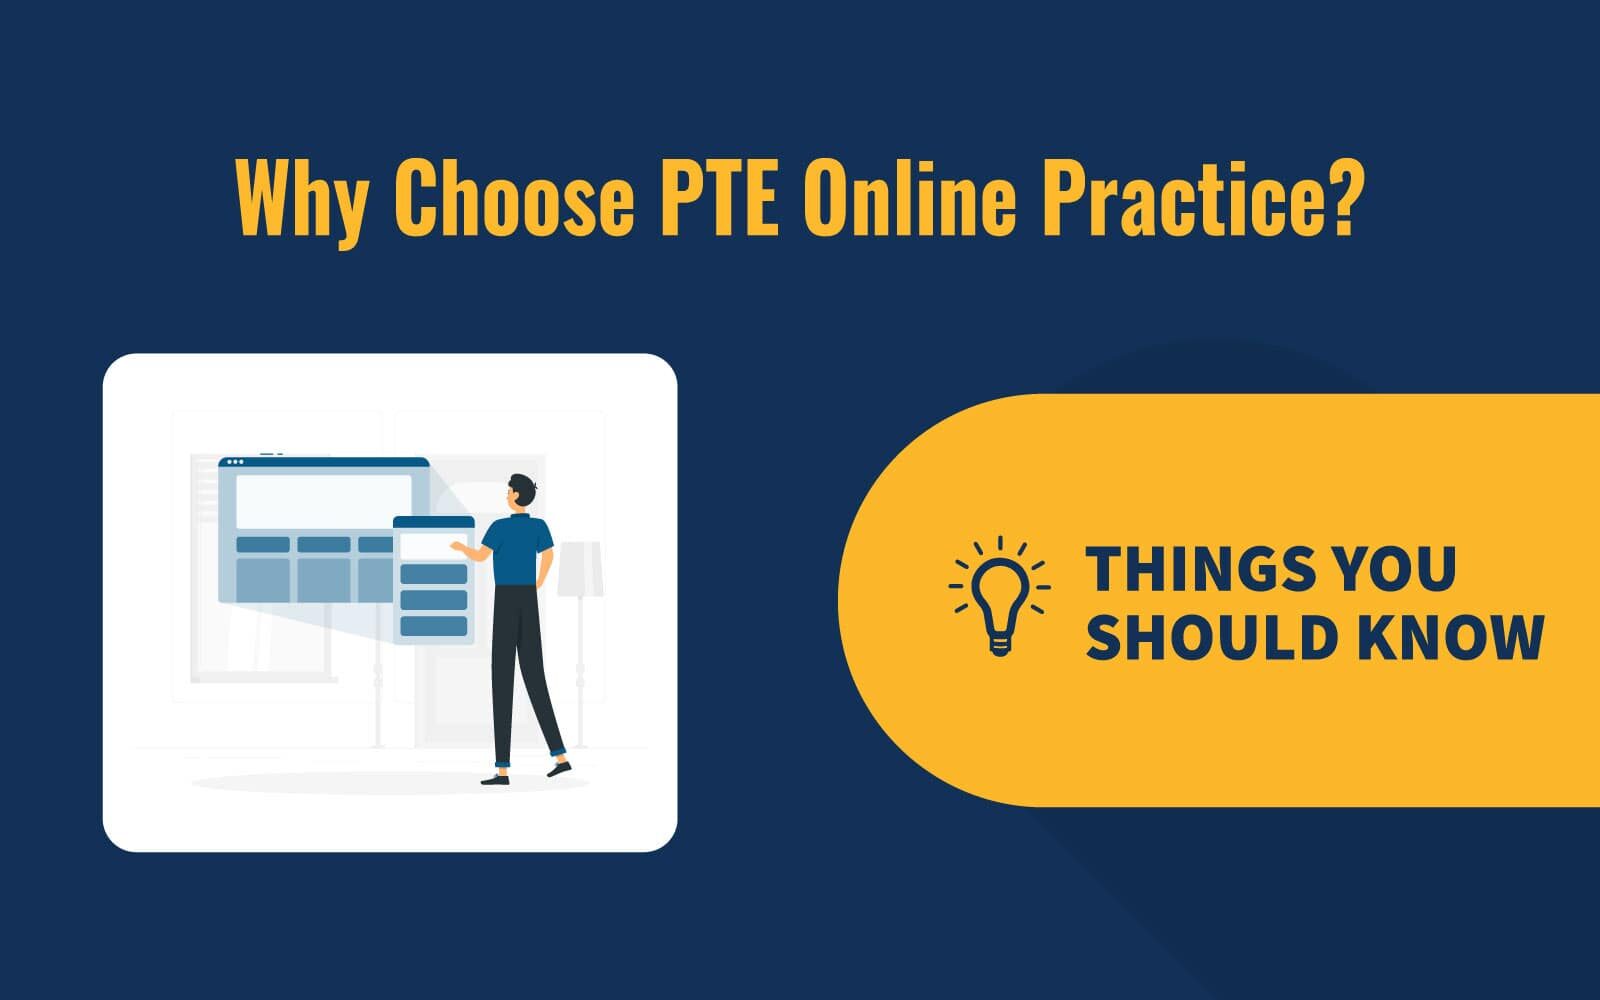 Why Choose PTE Online Practice?